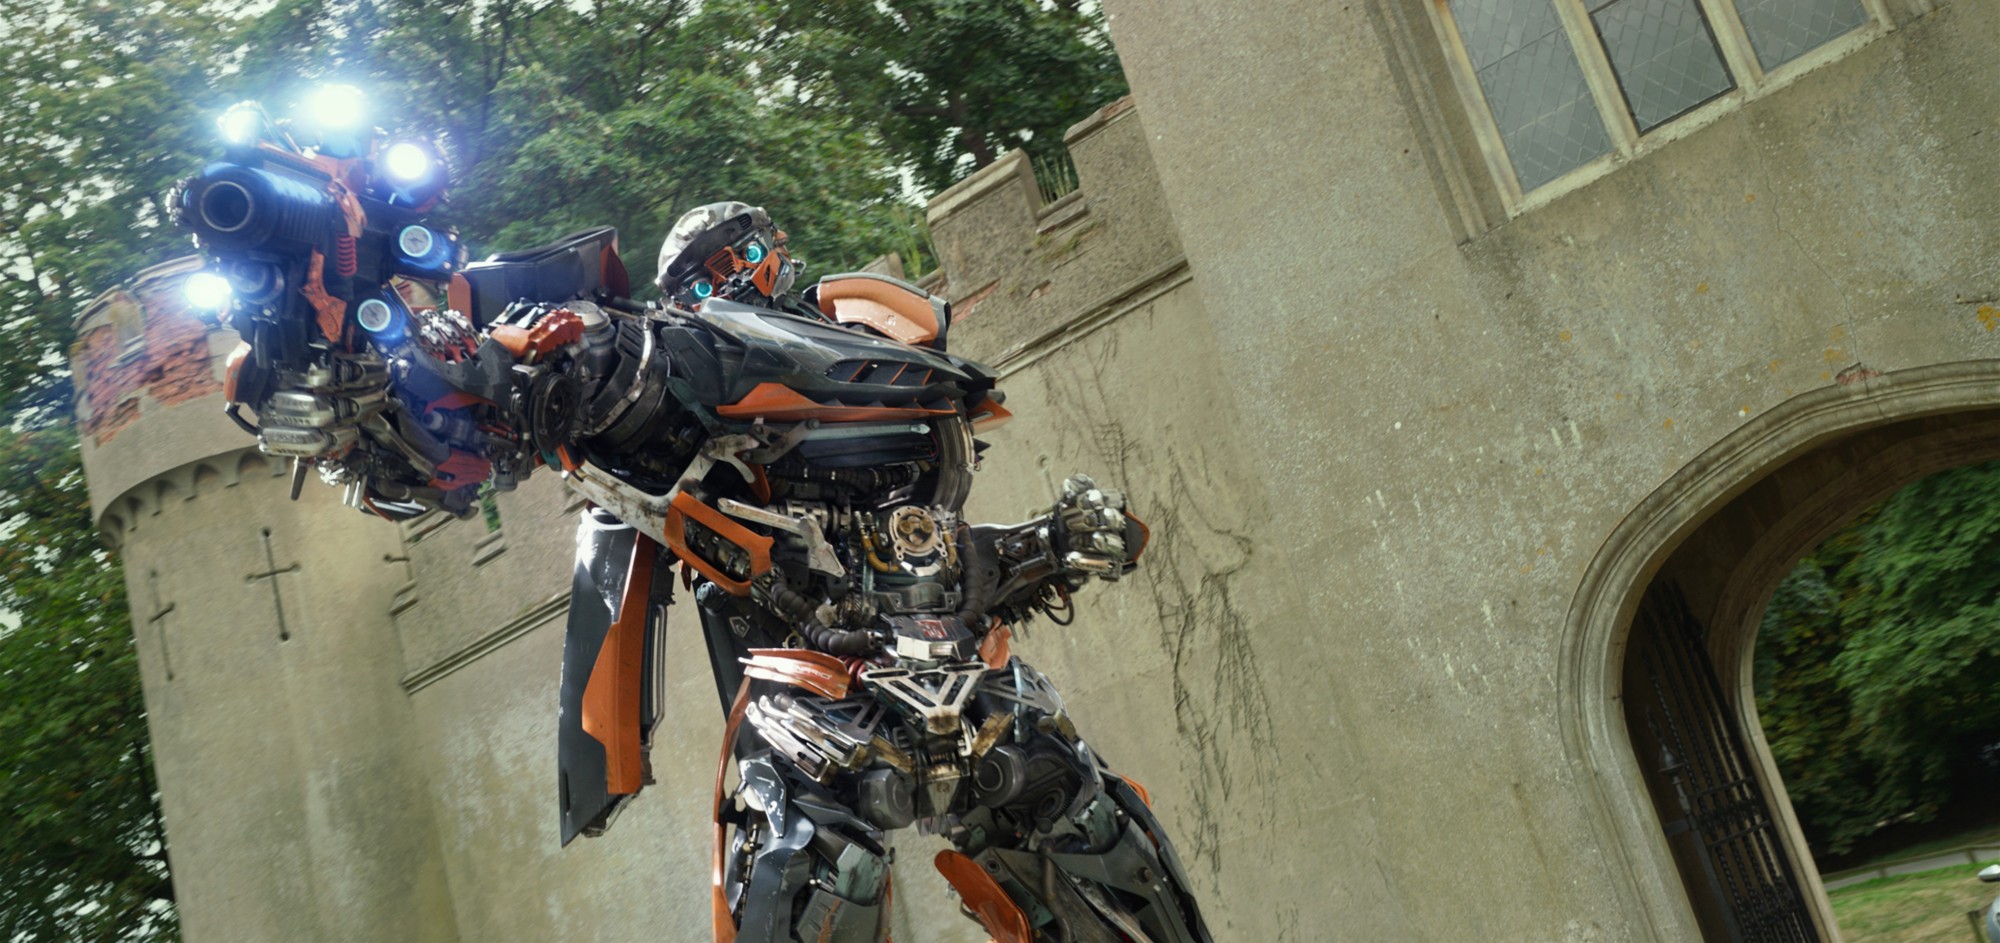 Hot Rod from Paramount Pictures' Transformers: The Last Knight (2017)